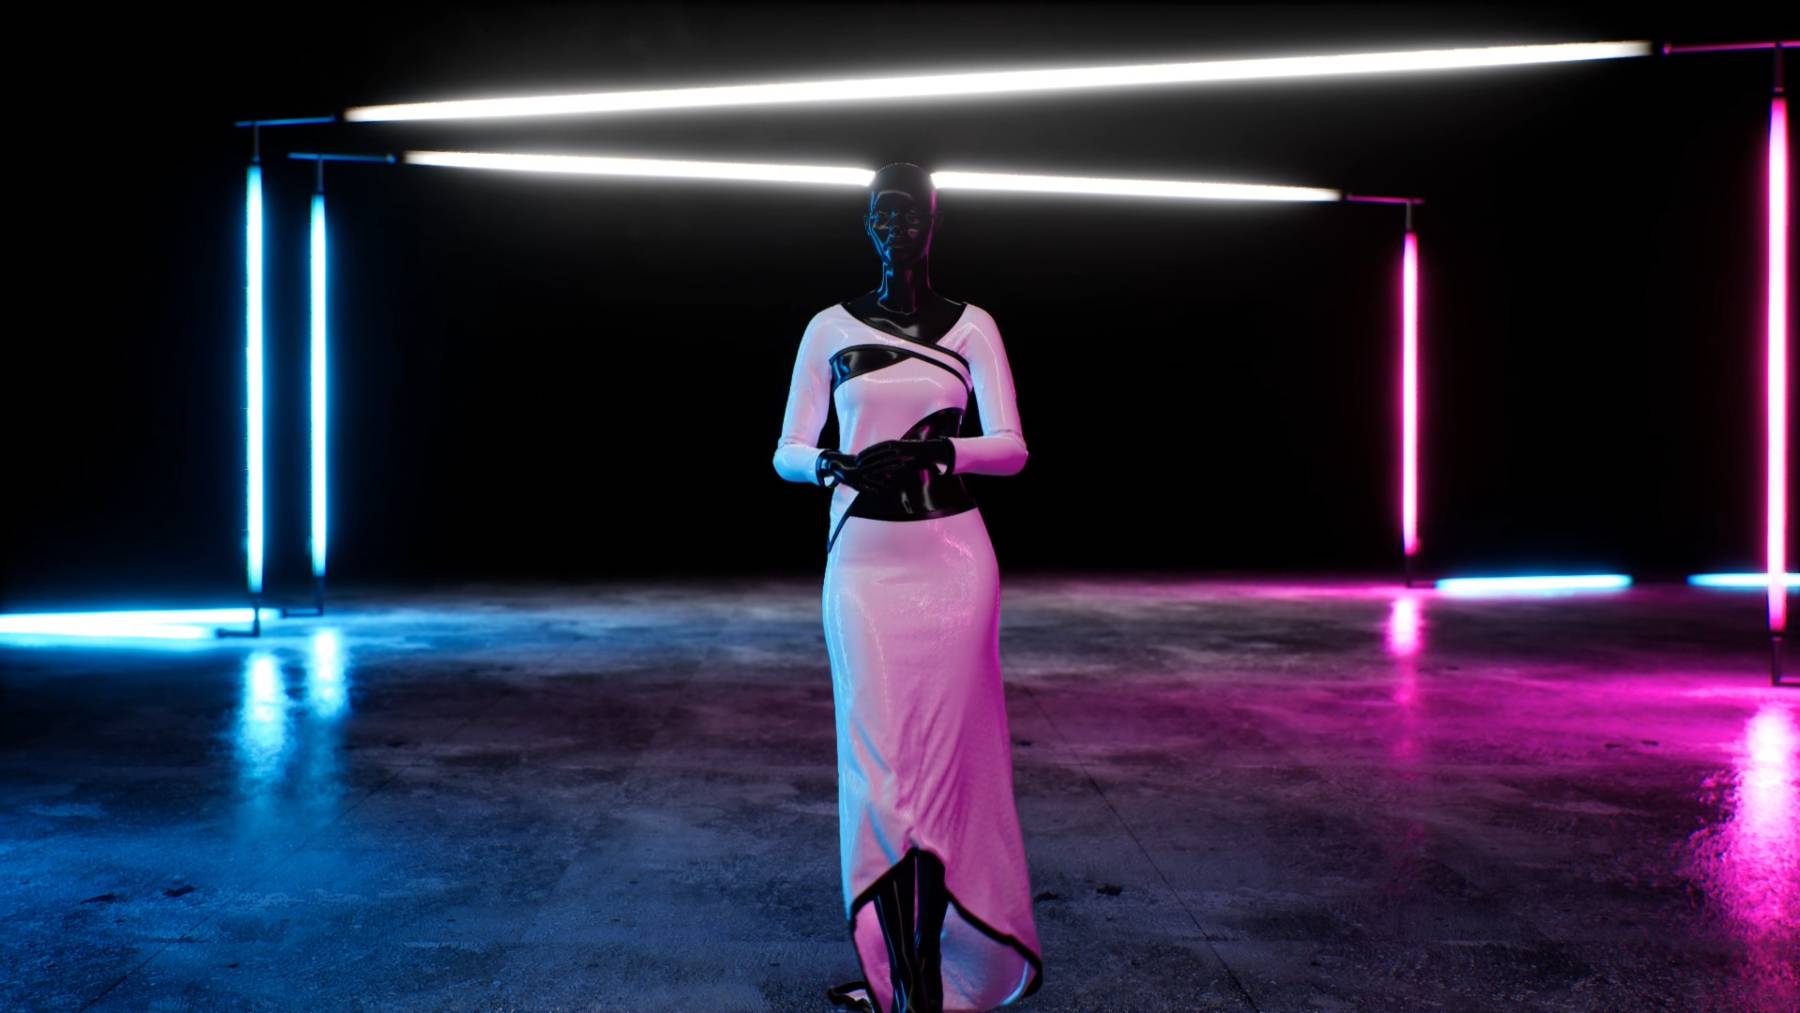 A digital image shows a robotic-looking model in a white dress standing in a dark room lit only by a few neon lights.